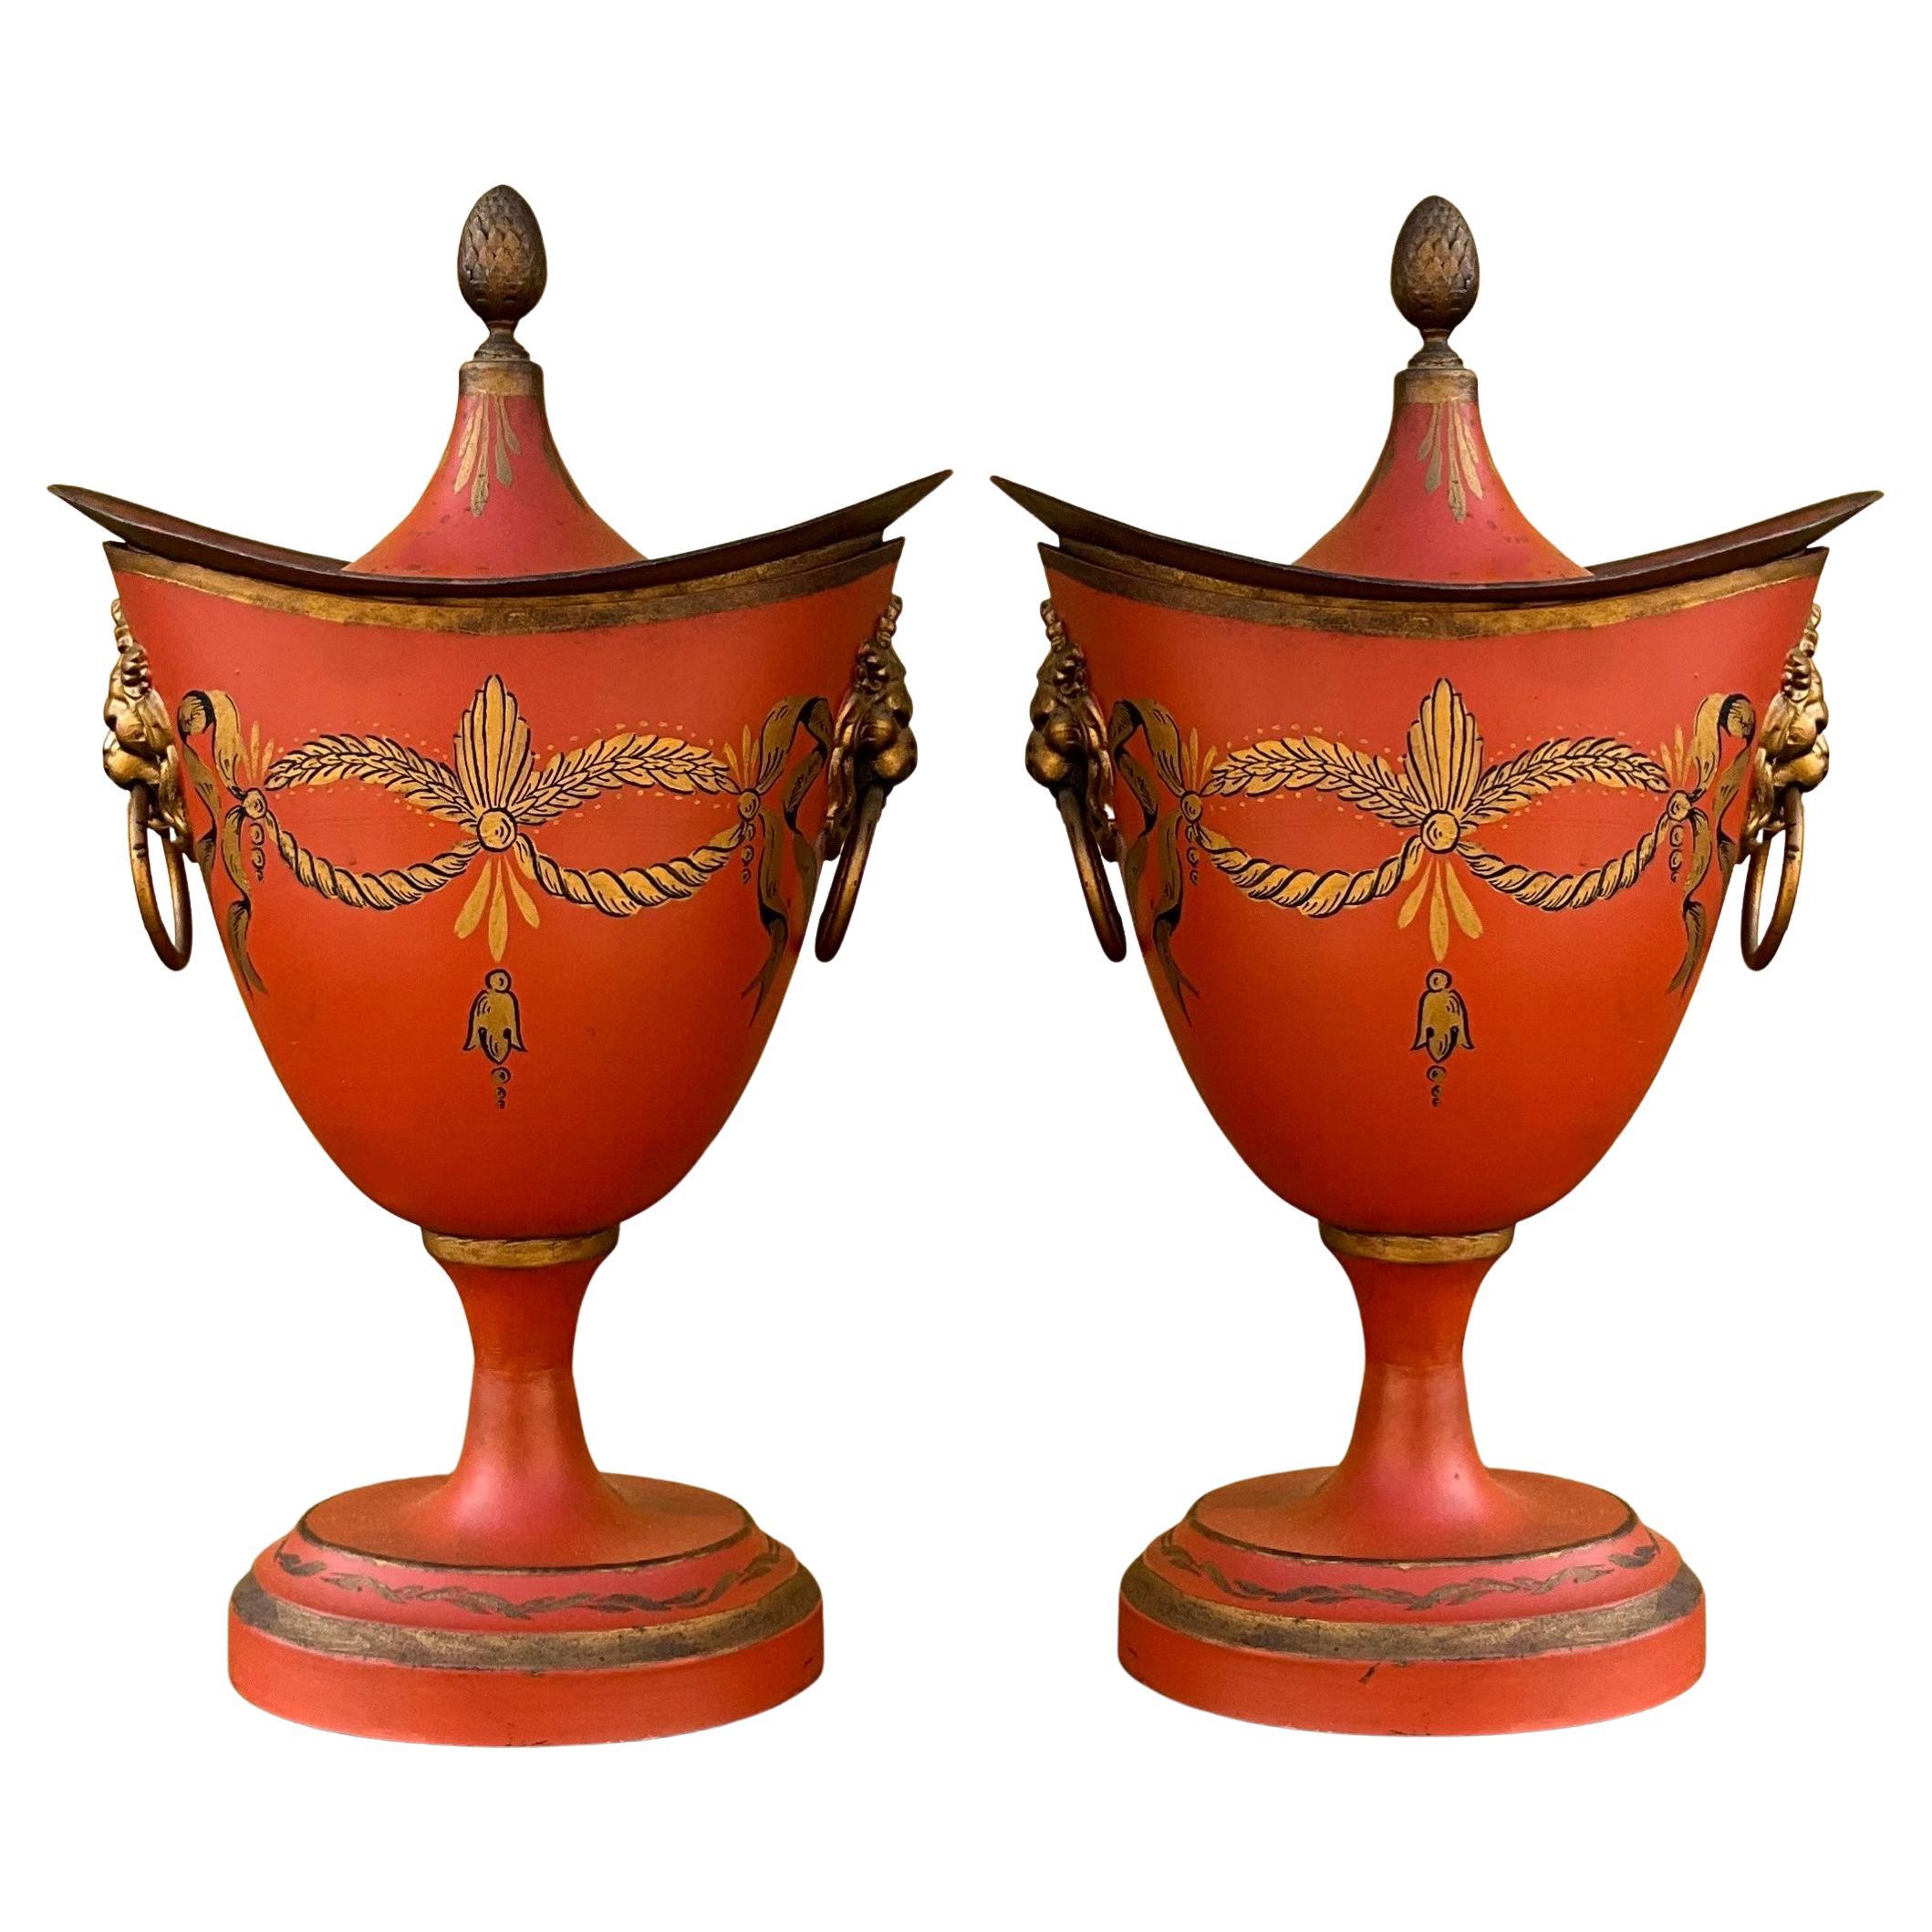 1950s French Signed Neo-Classical Style Tole Urns / Garniture, Pair